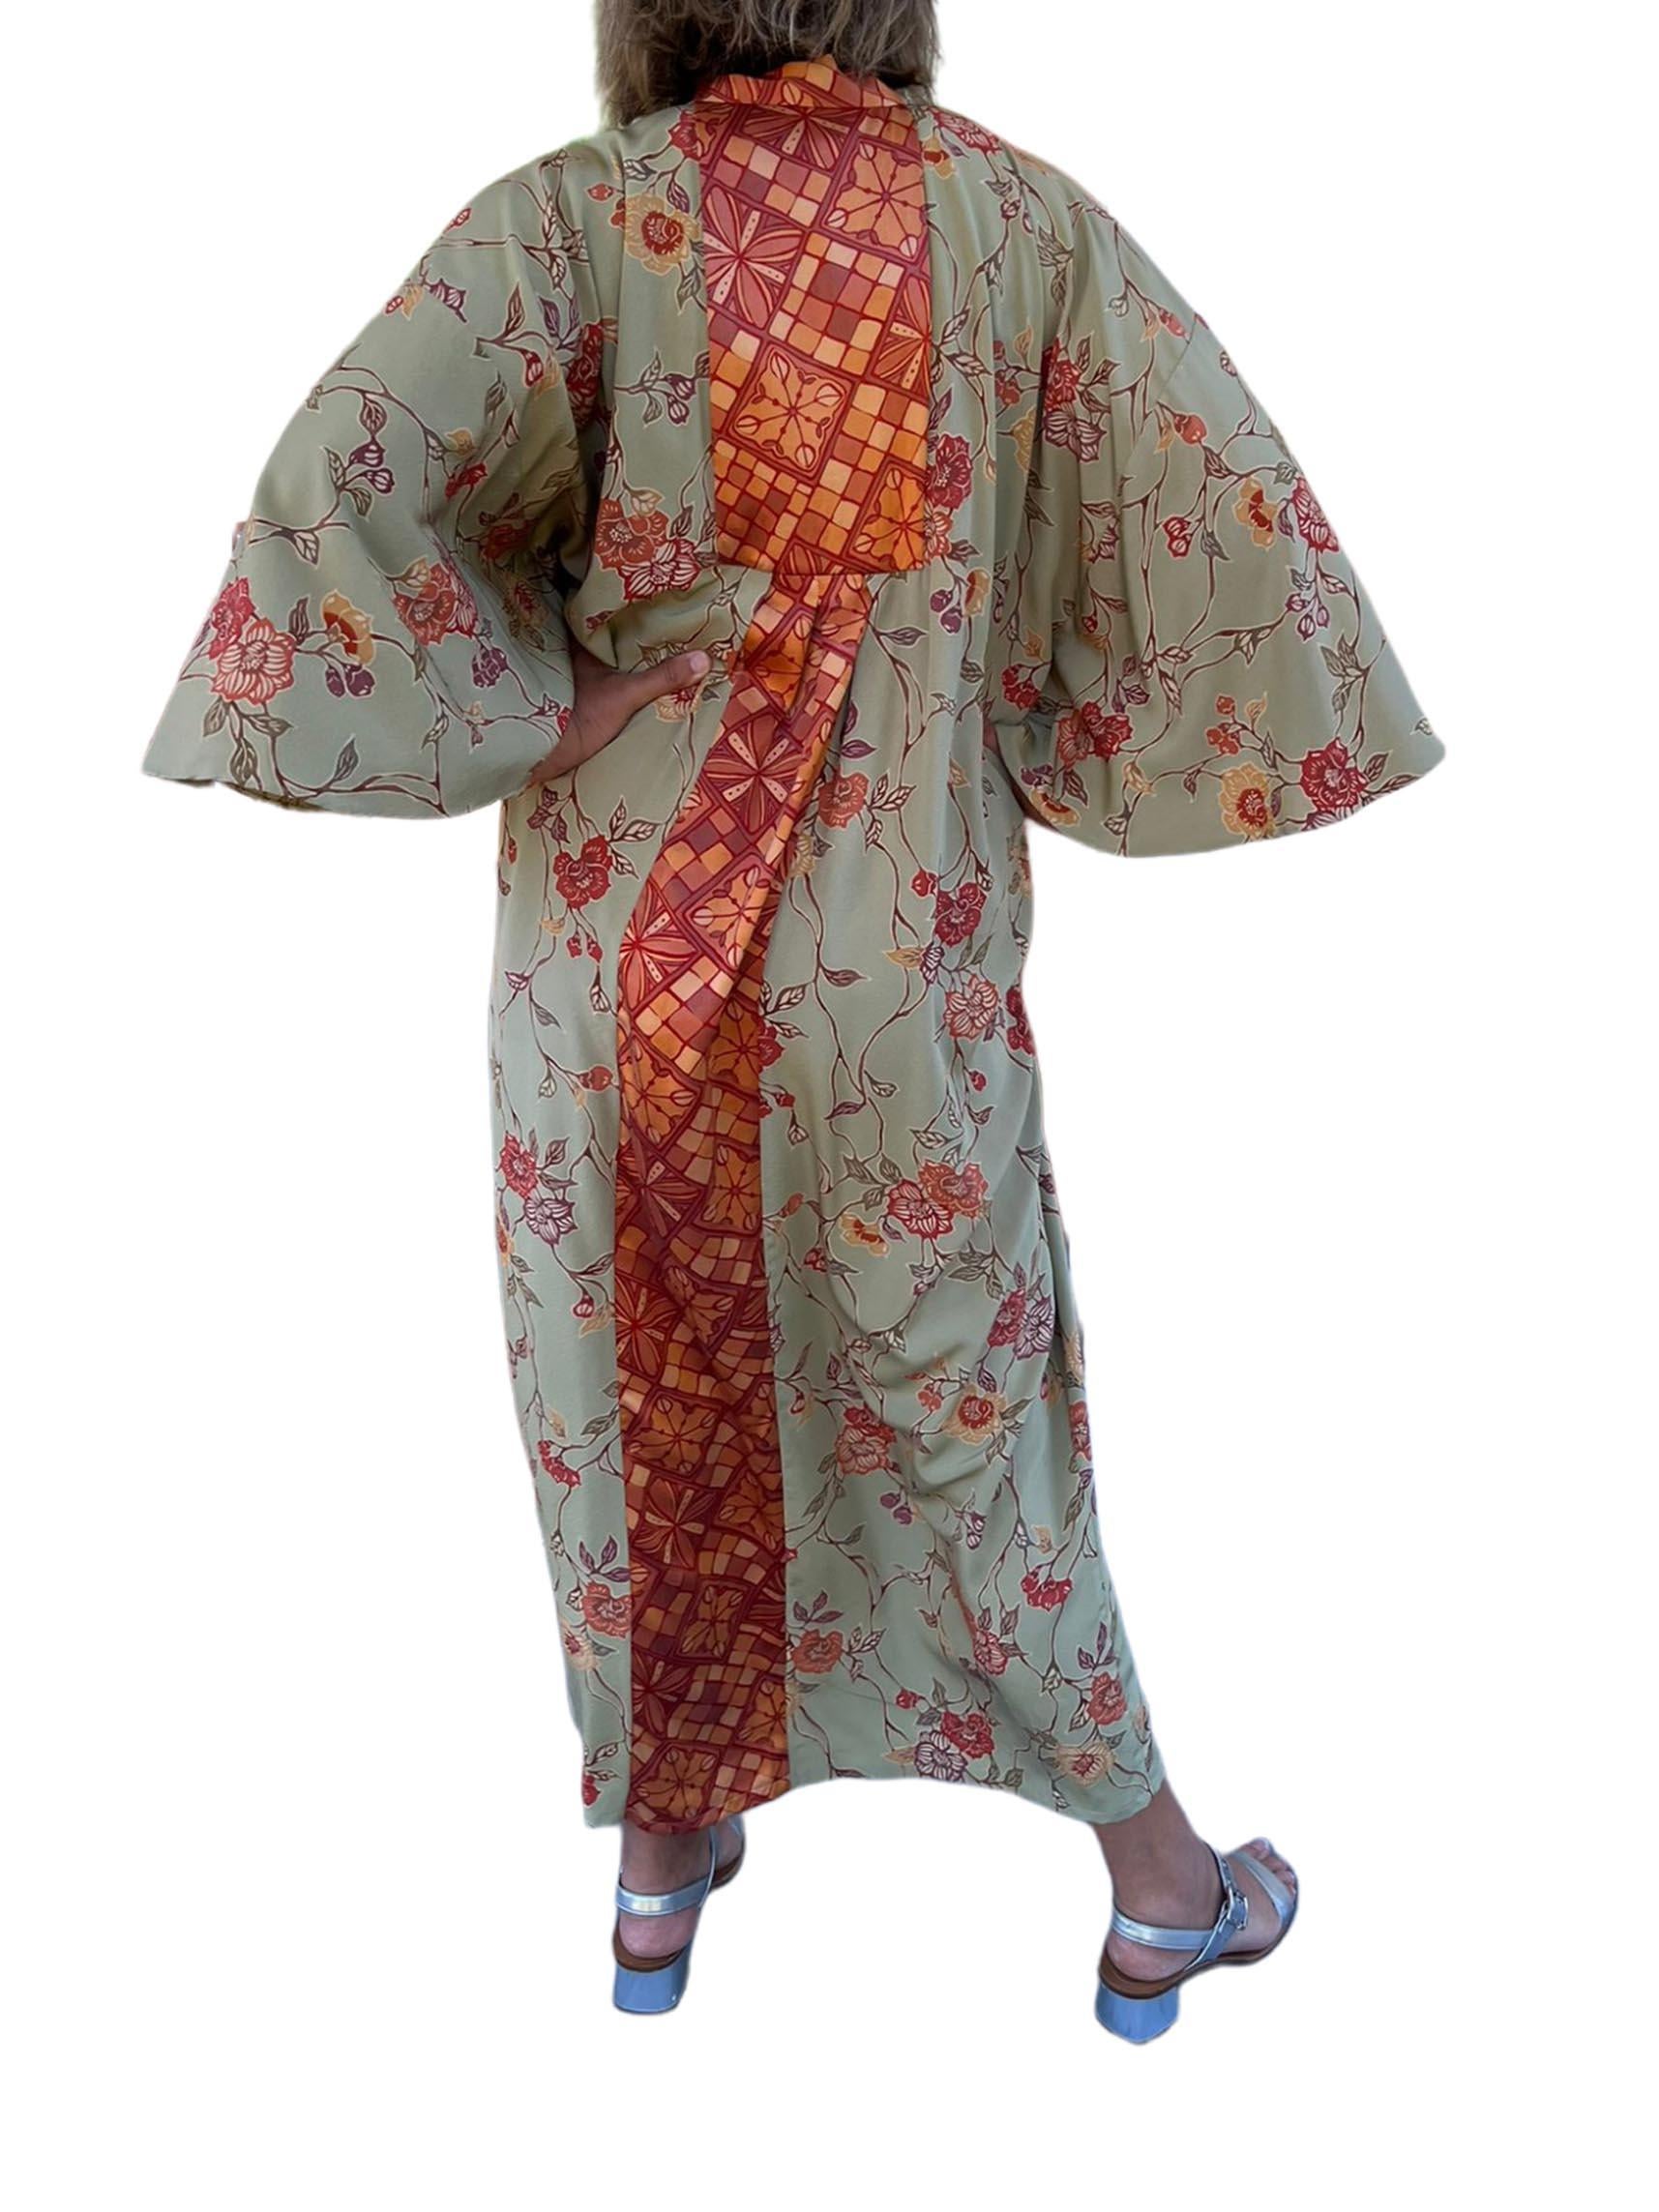 MORPHEW COLLECTION Jade Green & Orange Japanese Kimono Silk Kaftan In Excellent Condition For Sale In New York, NY